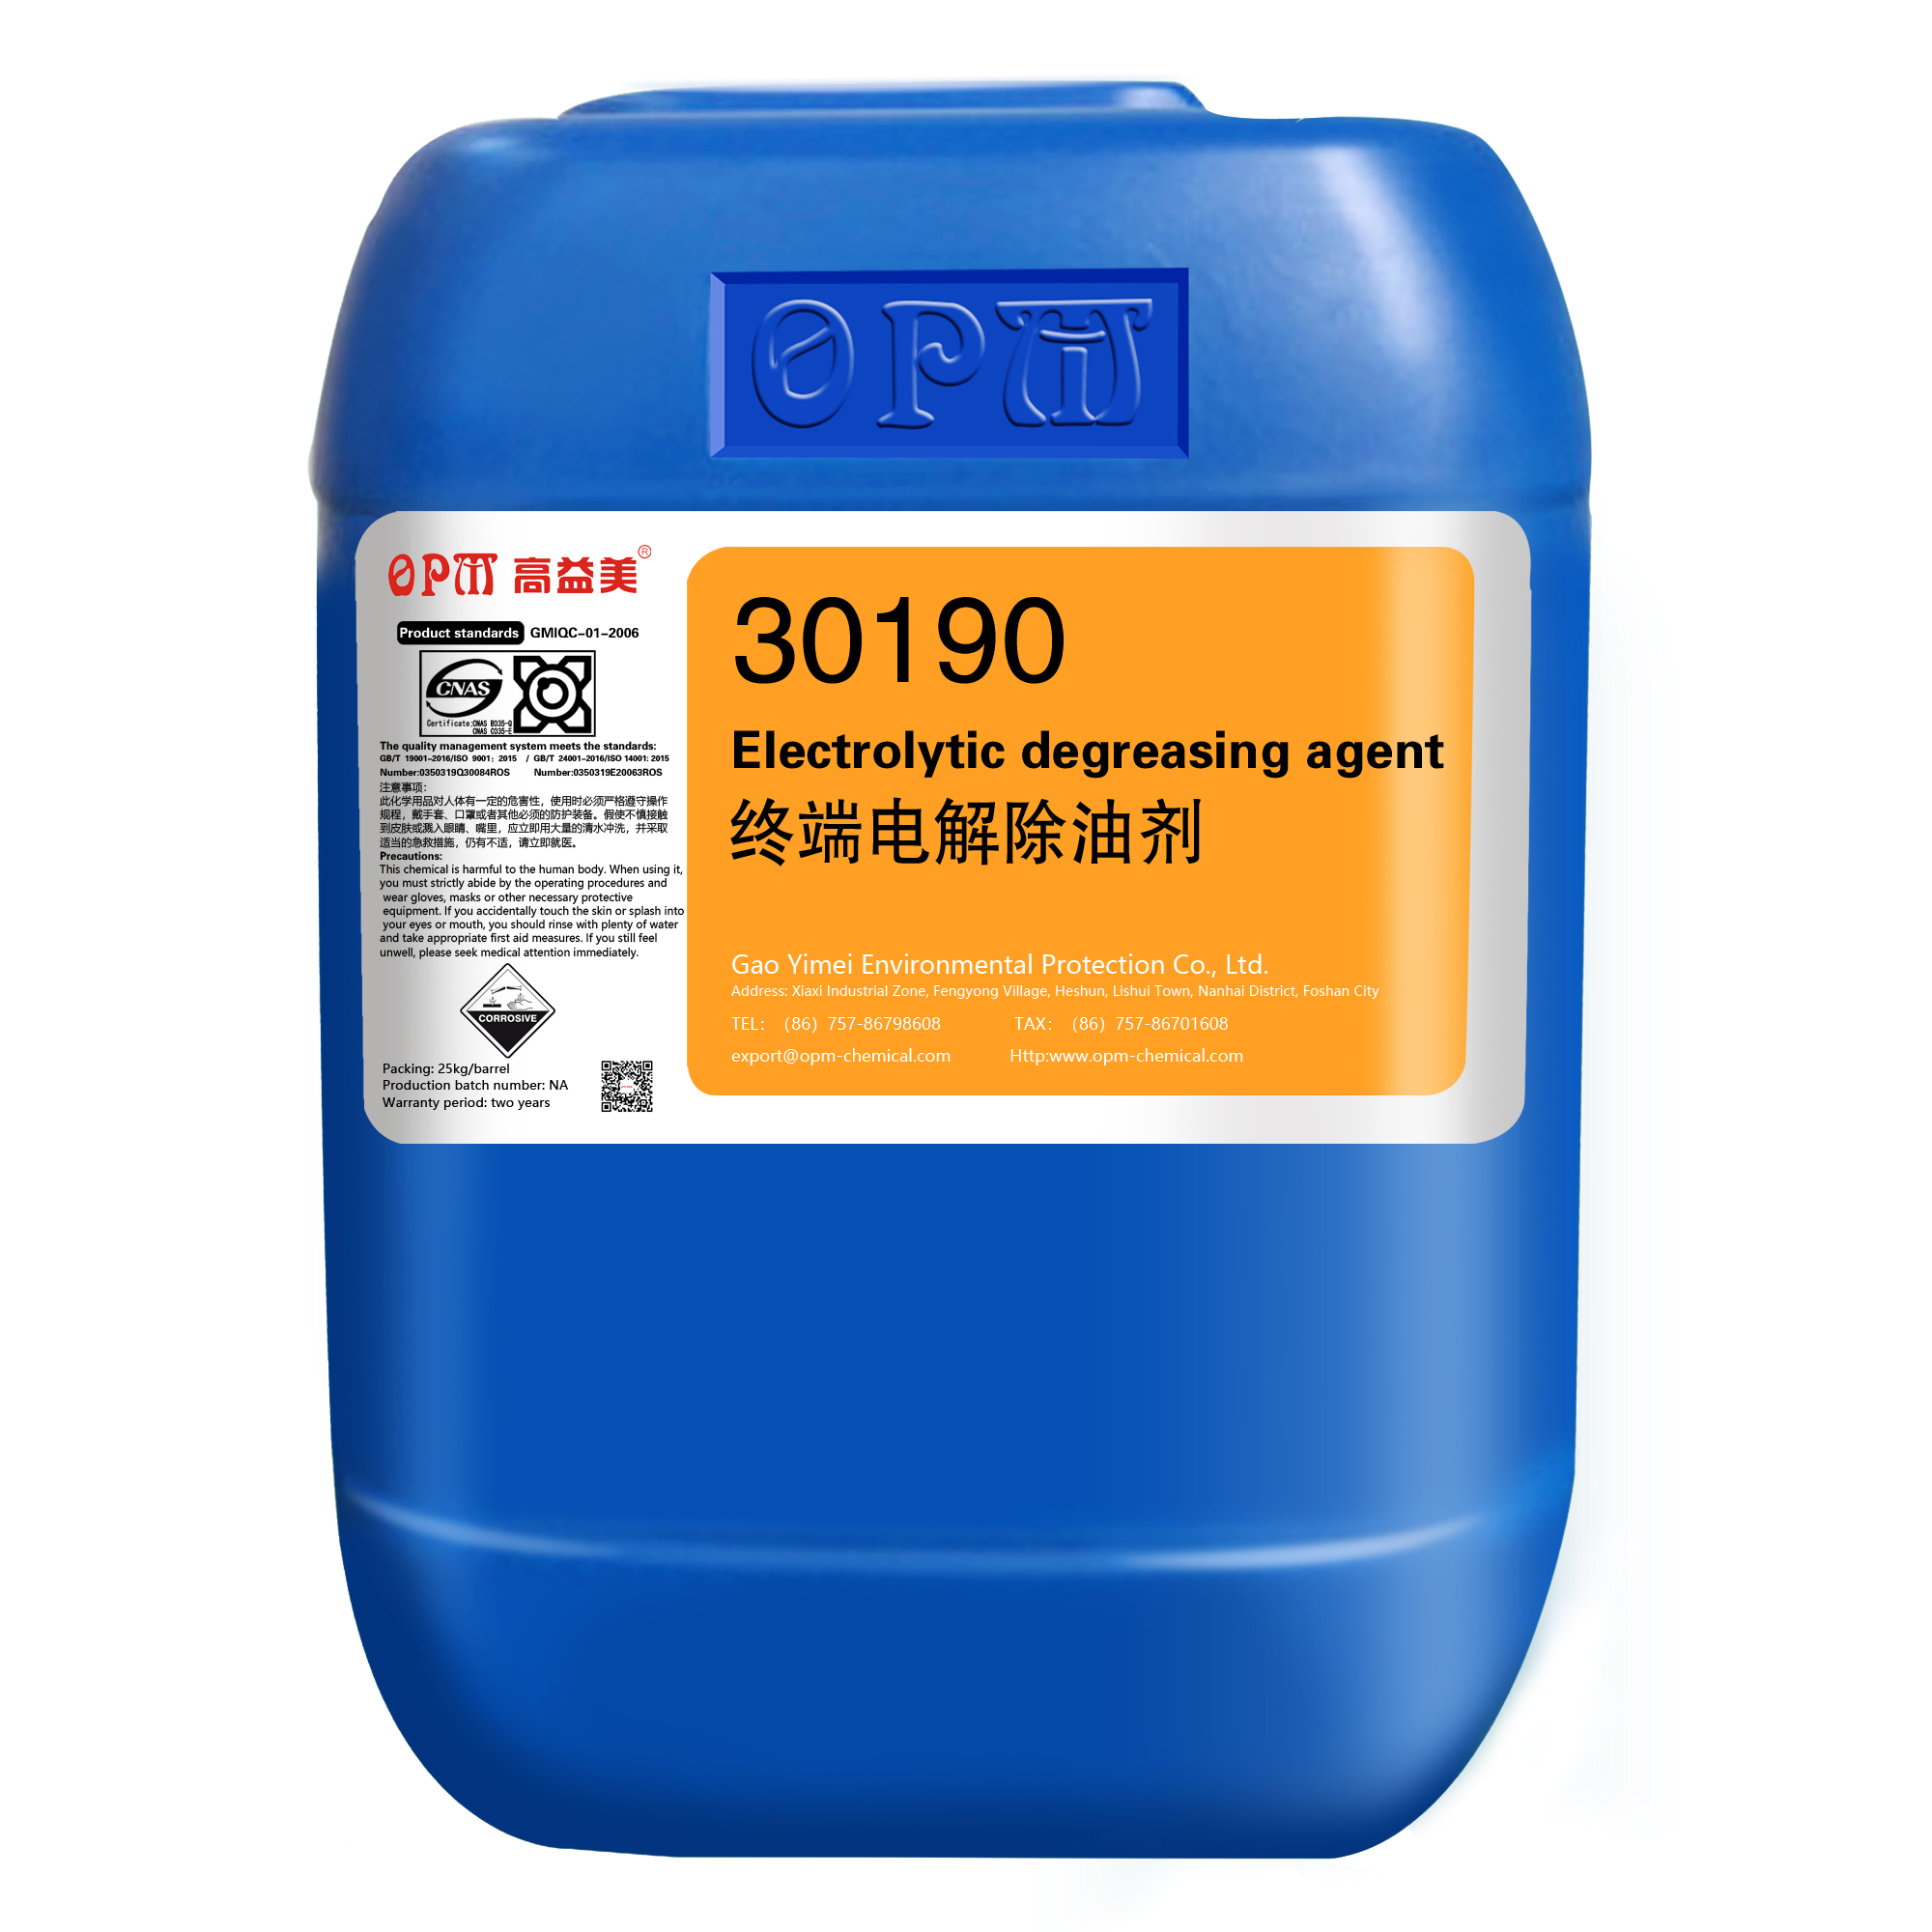 30190 Electrolytic degreasing agent